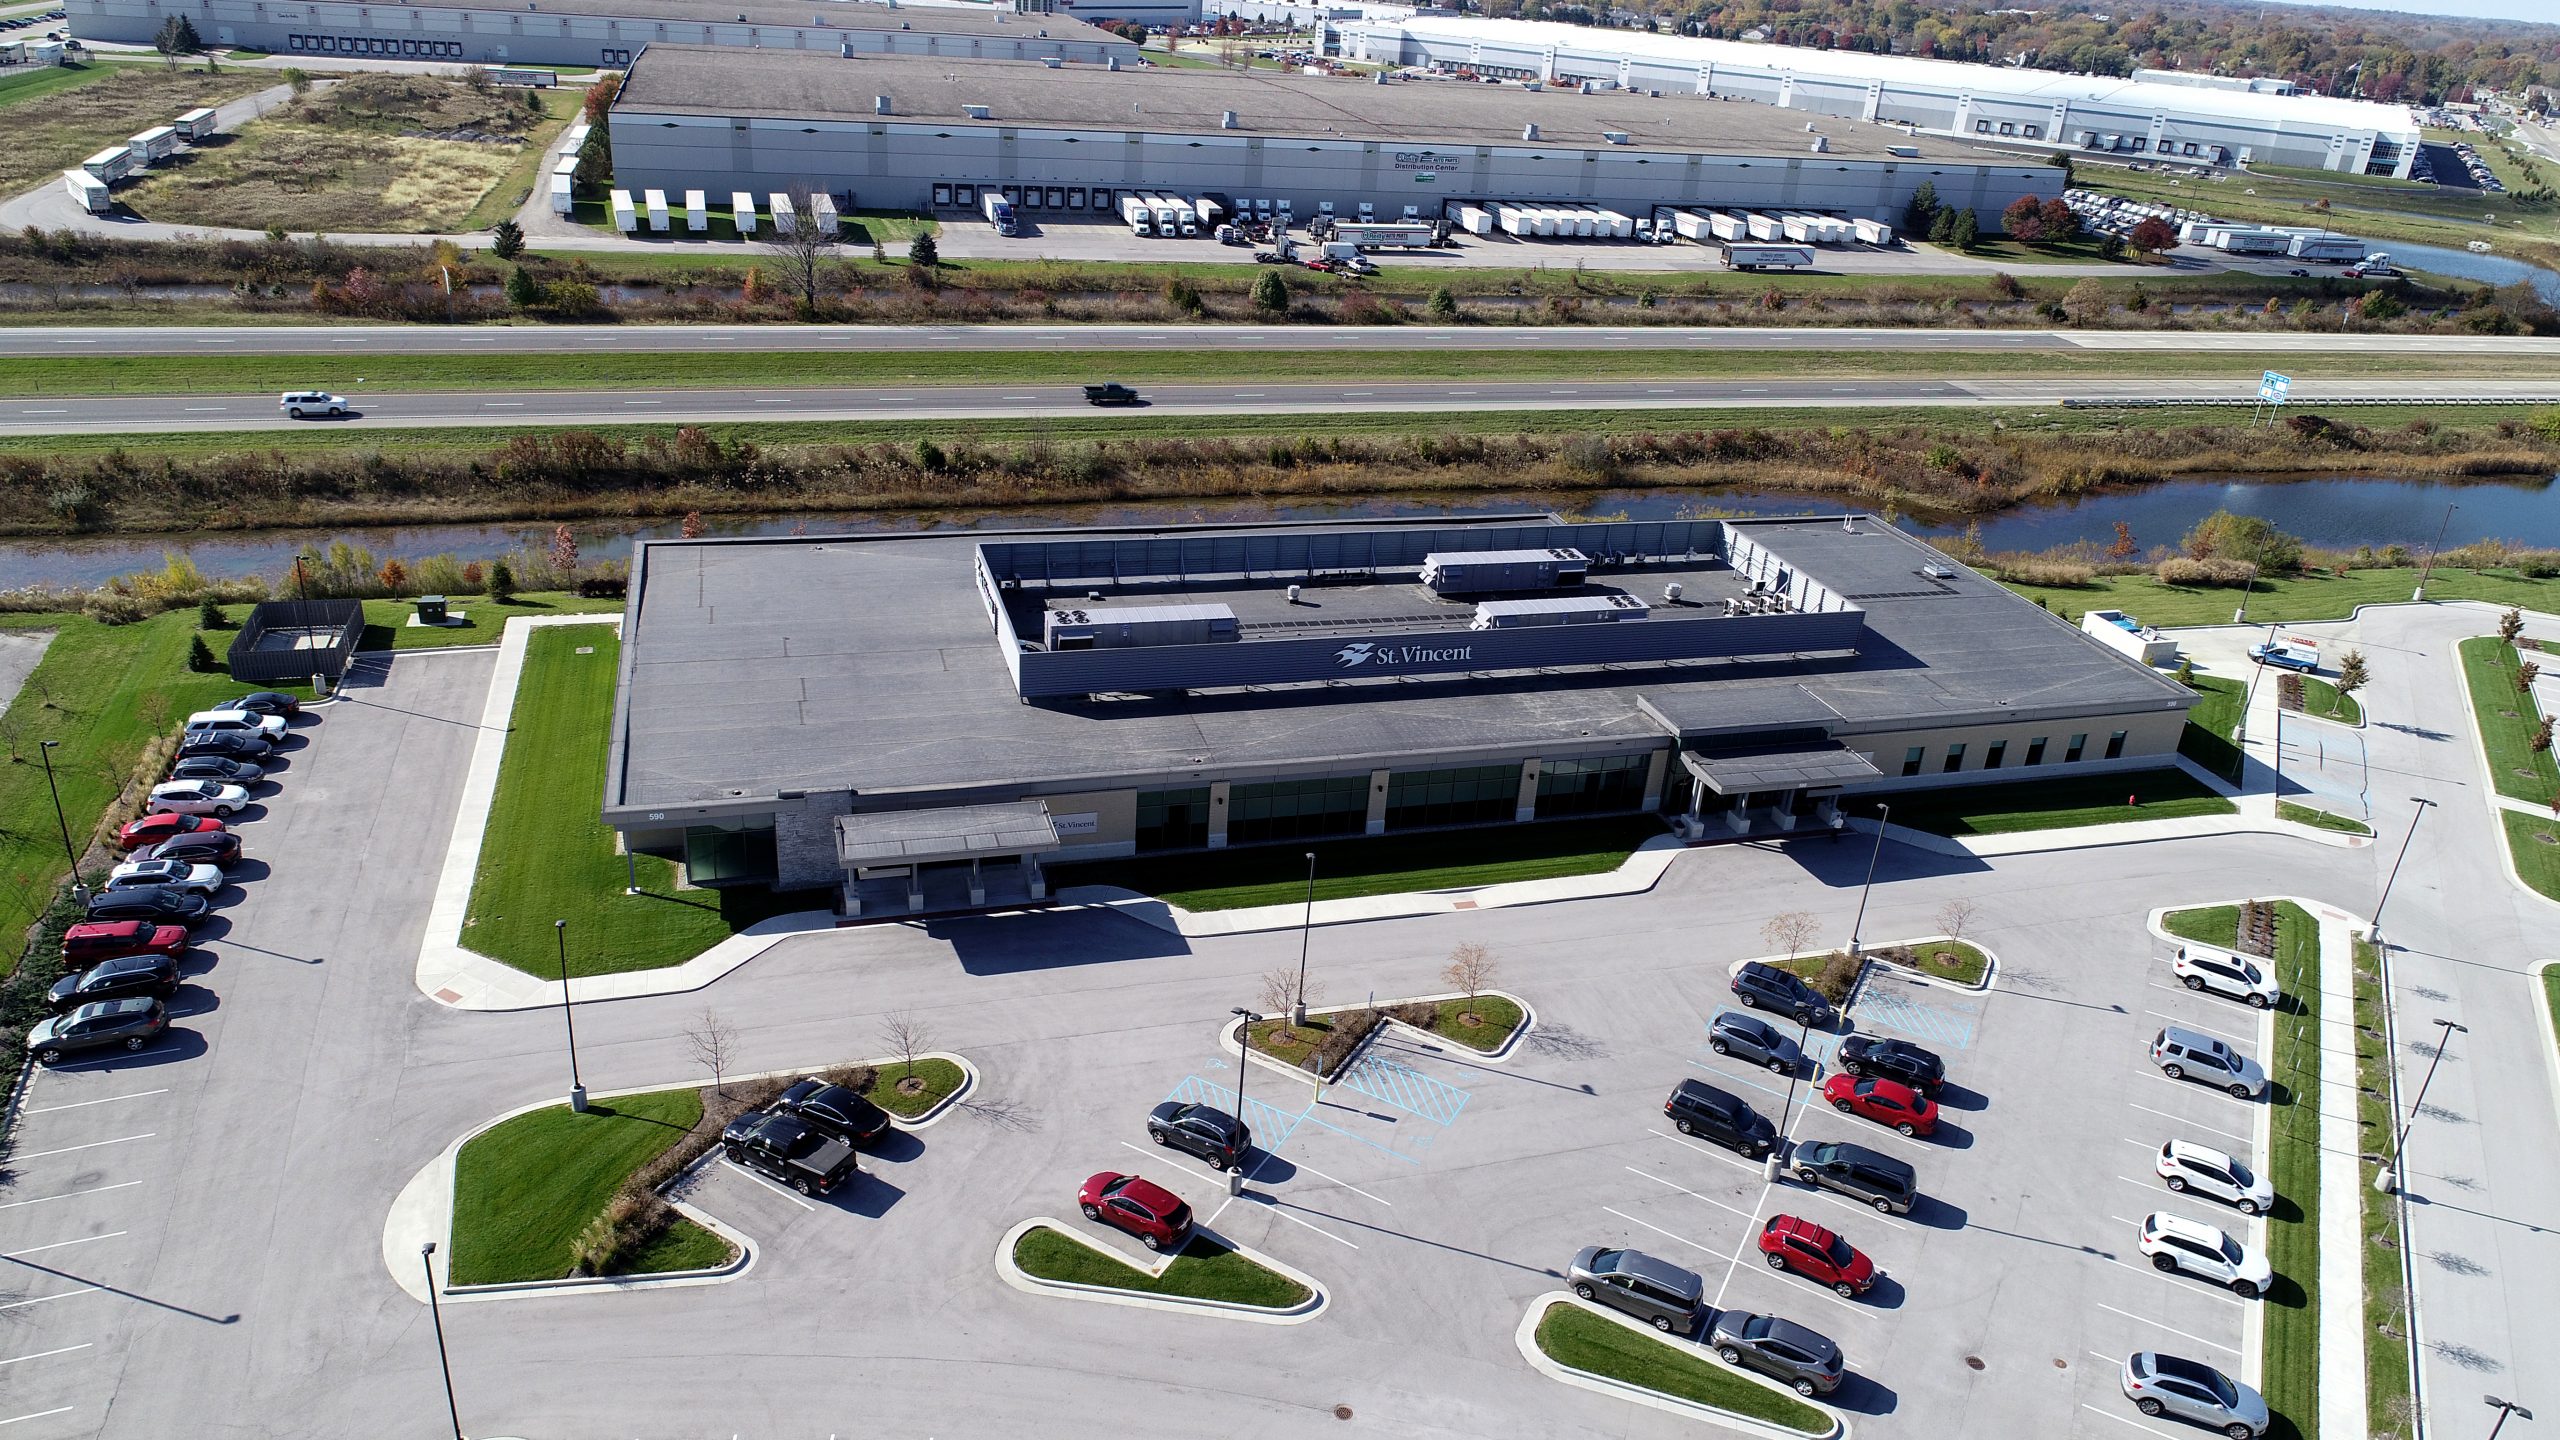 St. Vincent Brownsburg commercial roofing project by ce reeve roofing in indiana